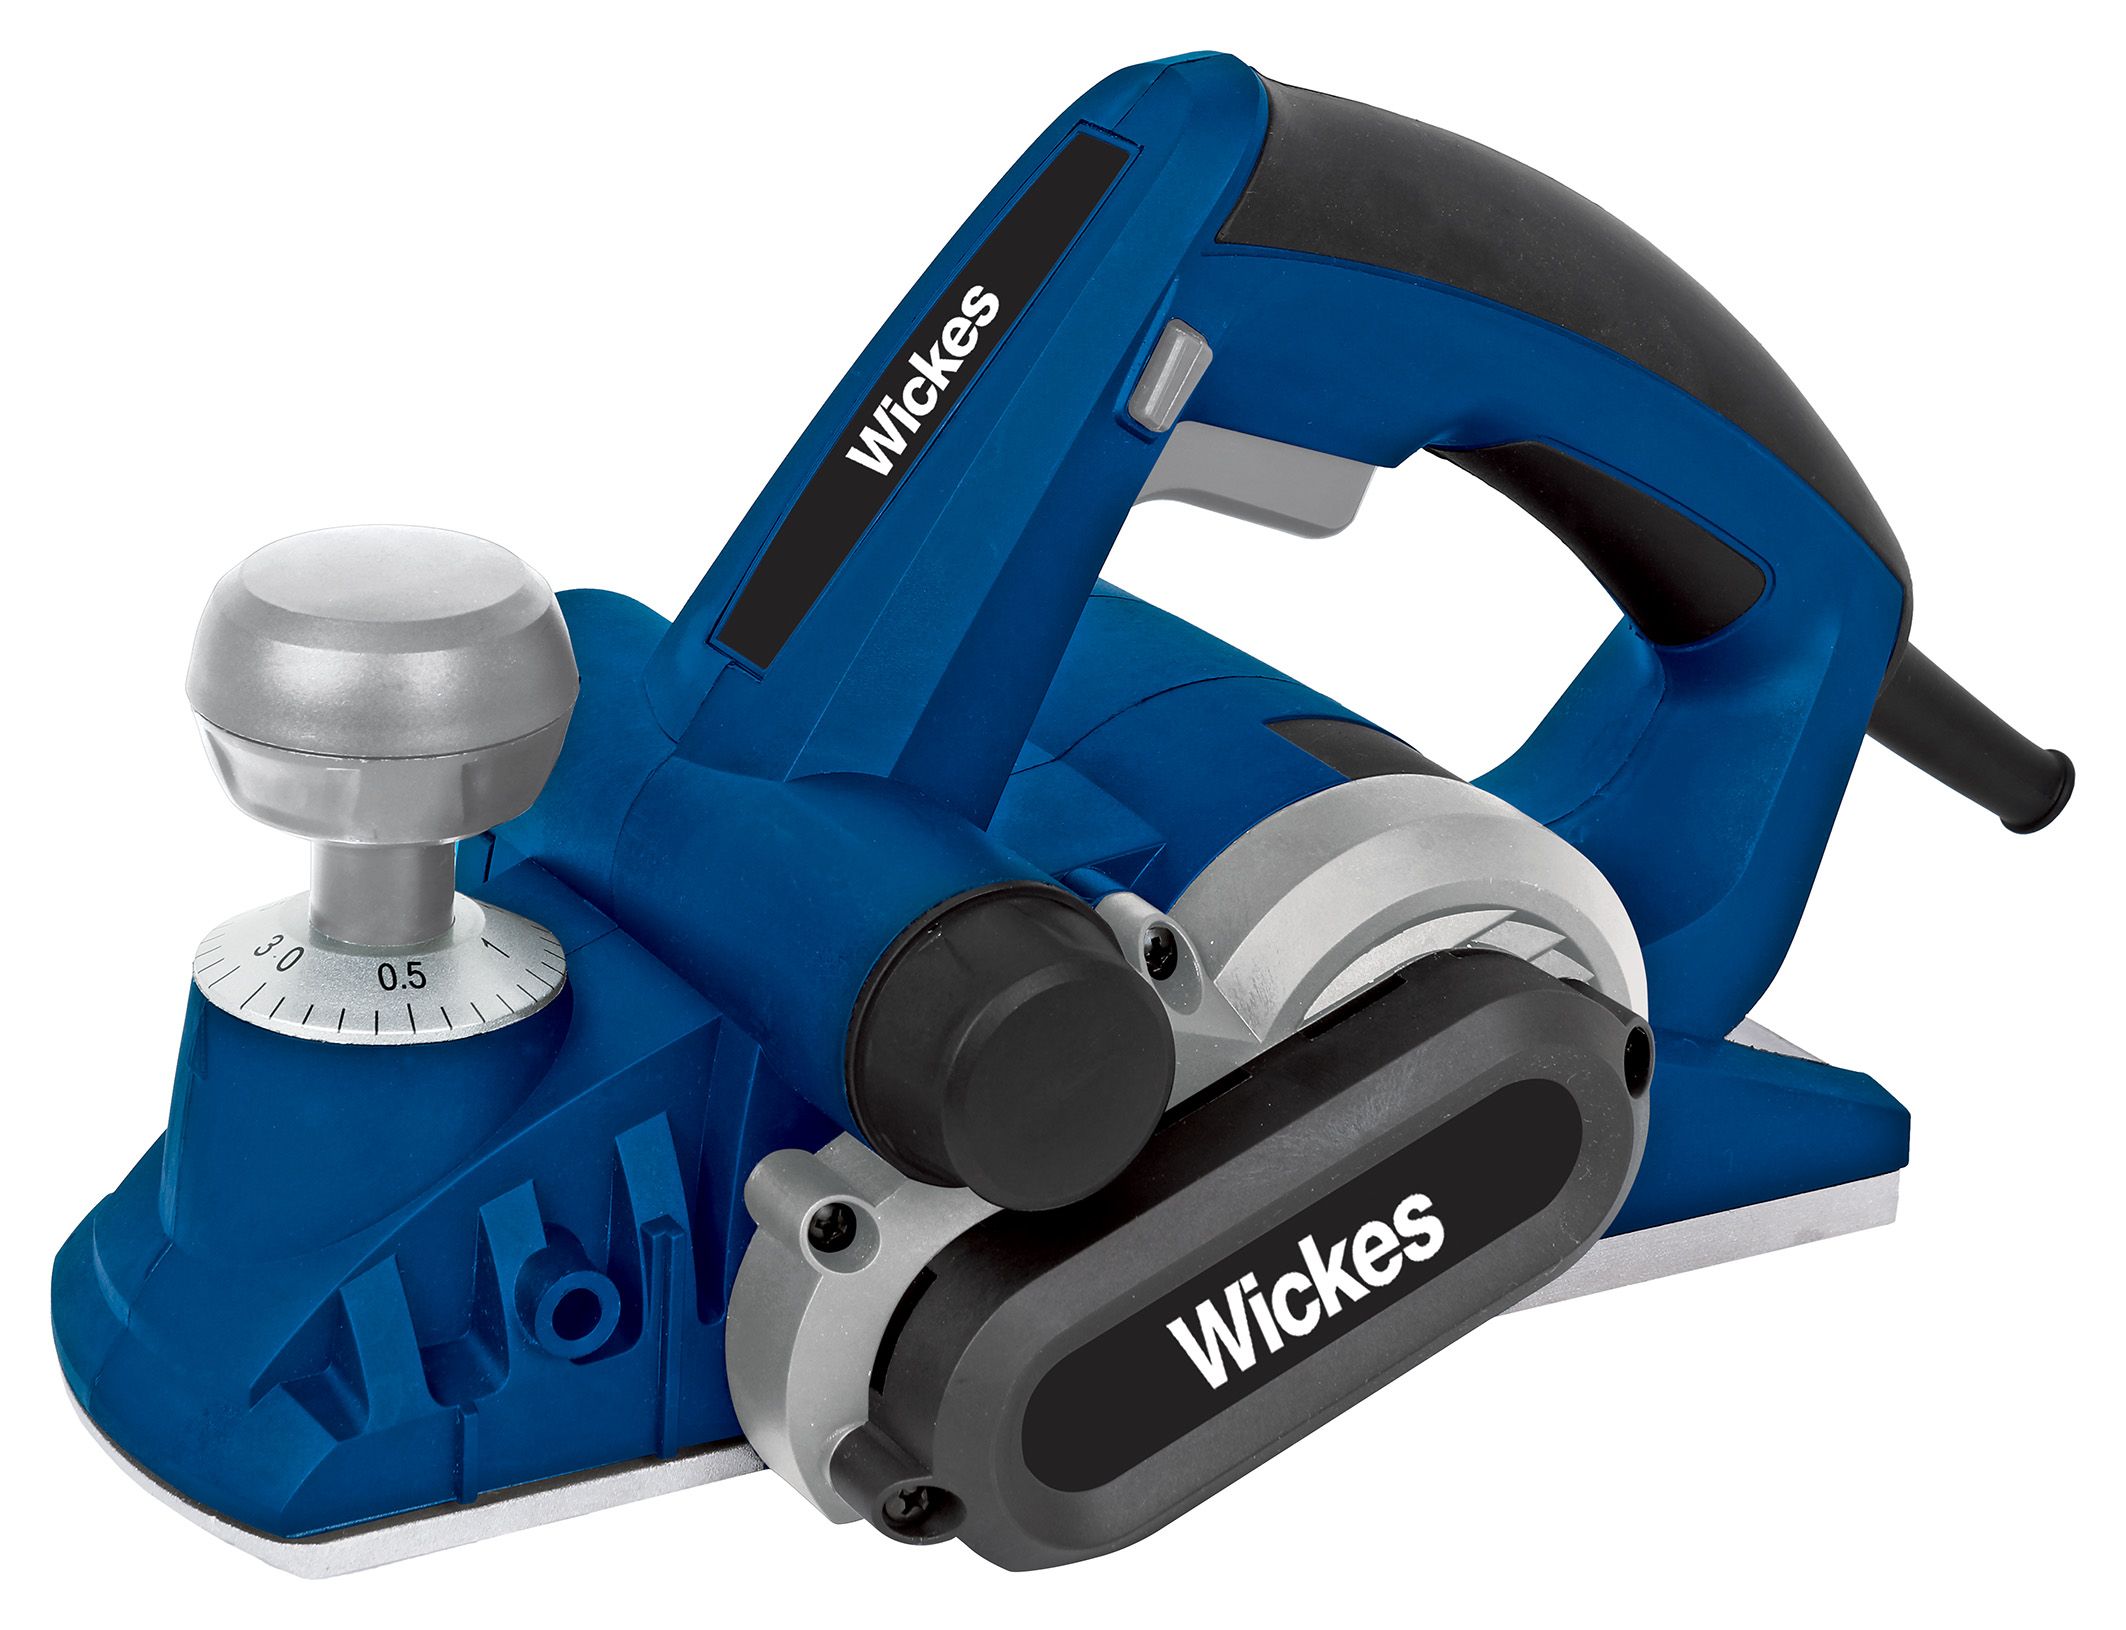 Image of Wickes 3mm Corded Planer - 900W